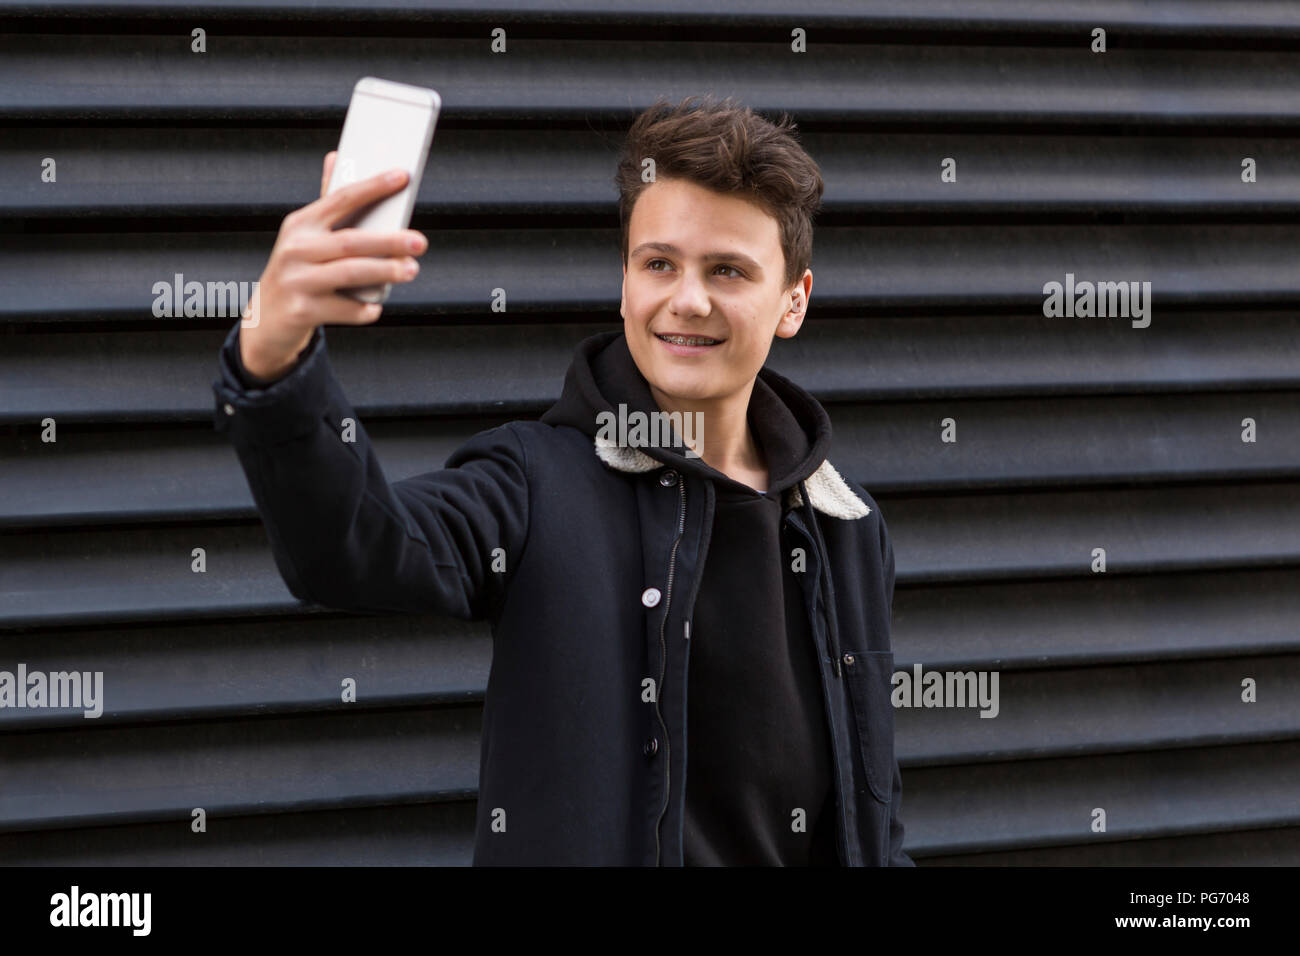 Portrait of smiling teenage boy taking selfie with smartphone in front of black background Stock Photo